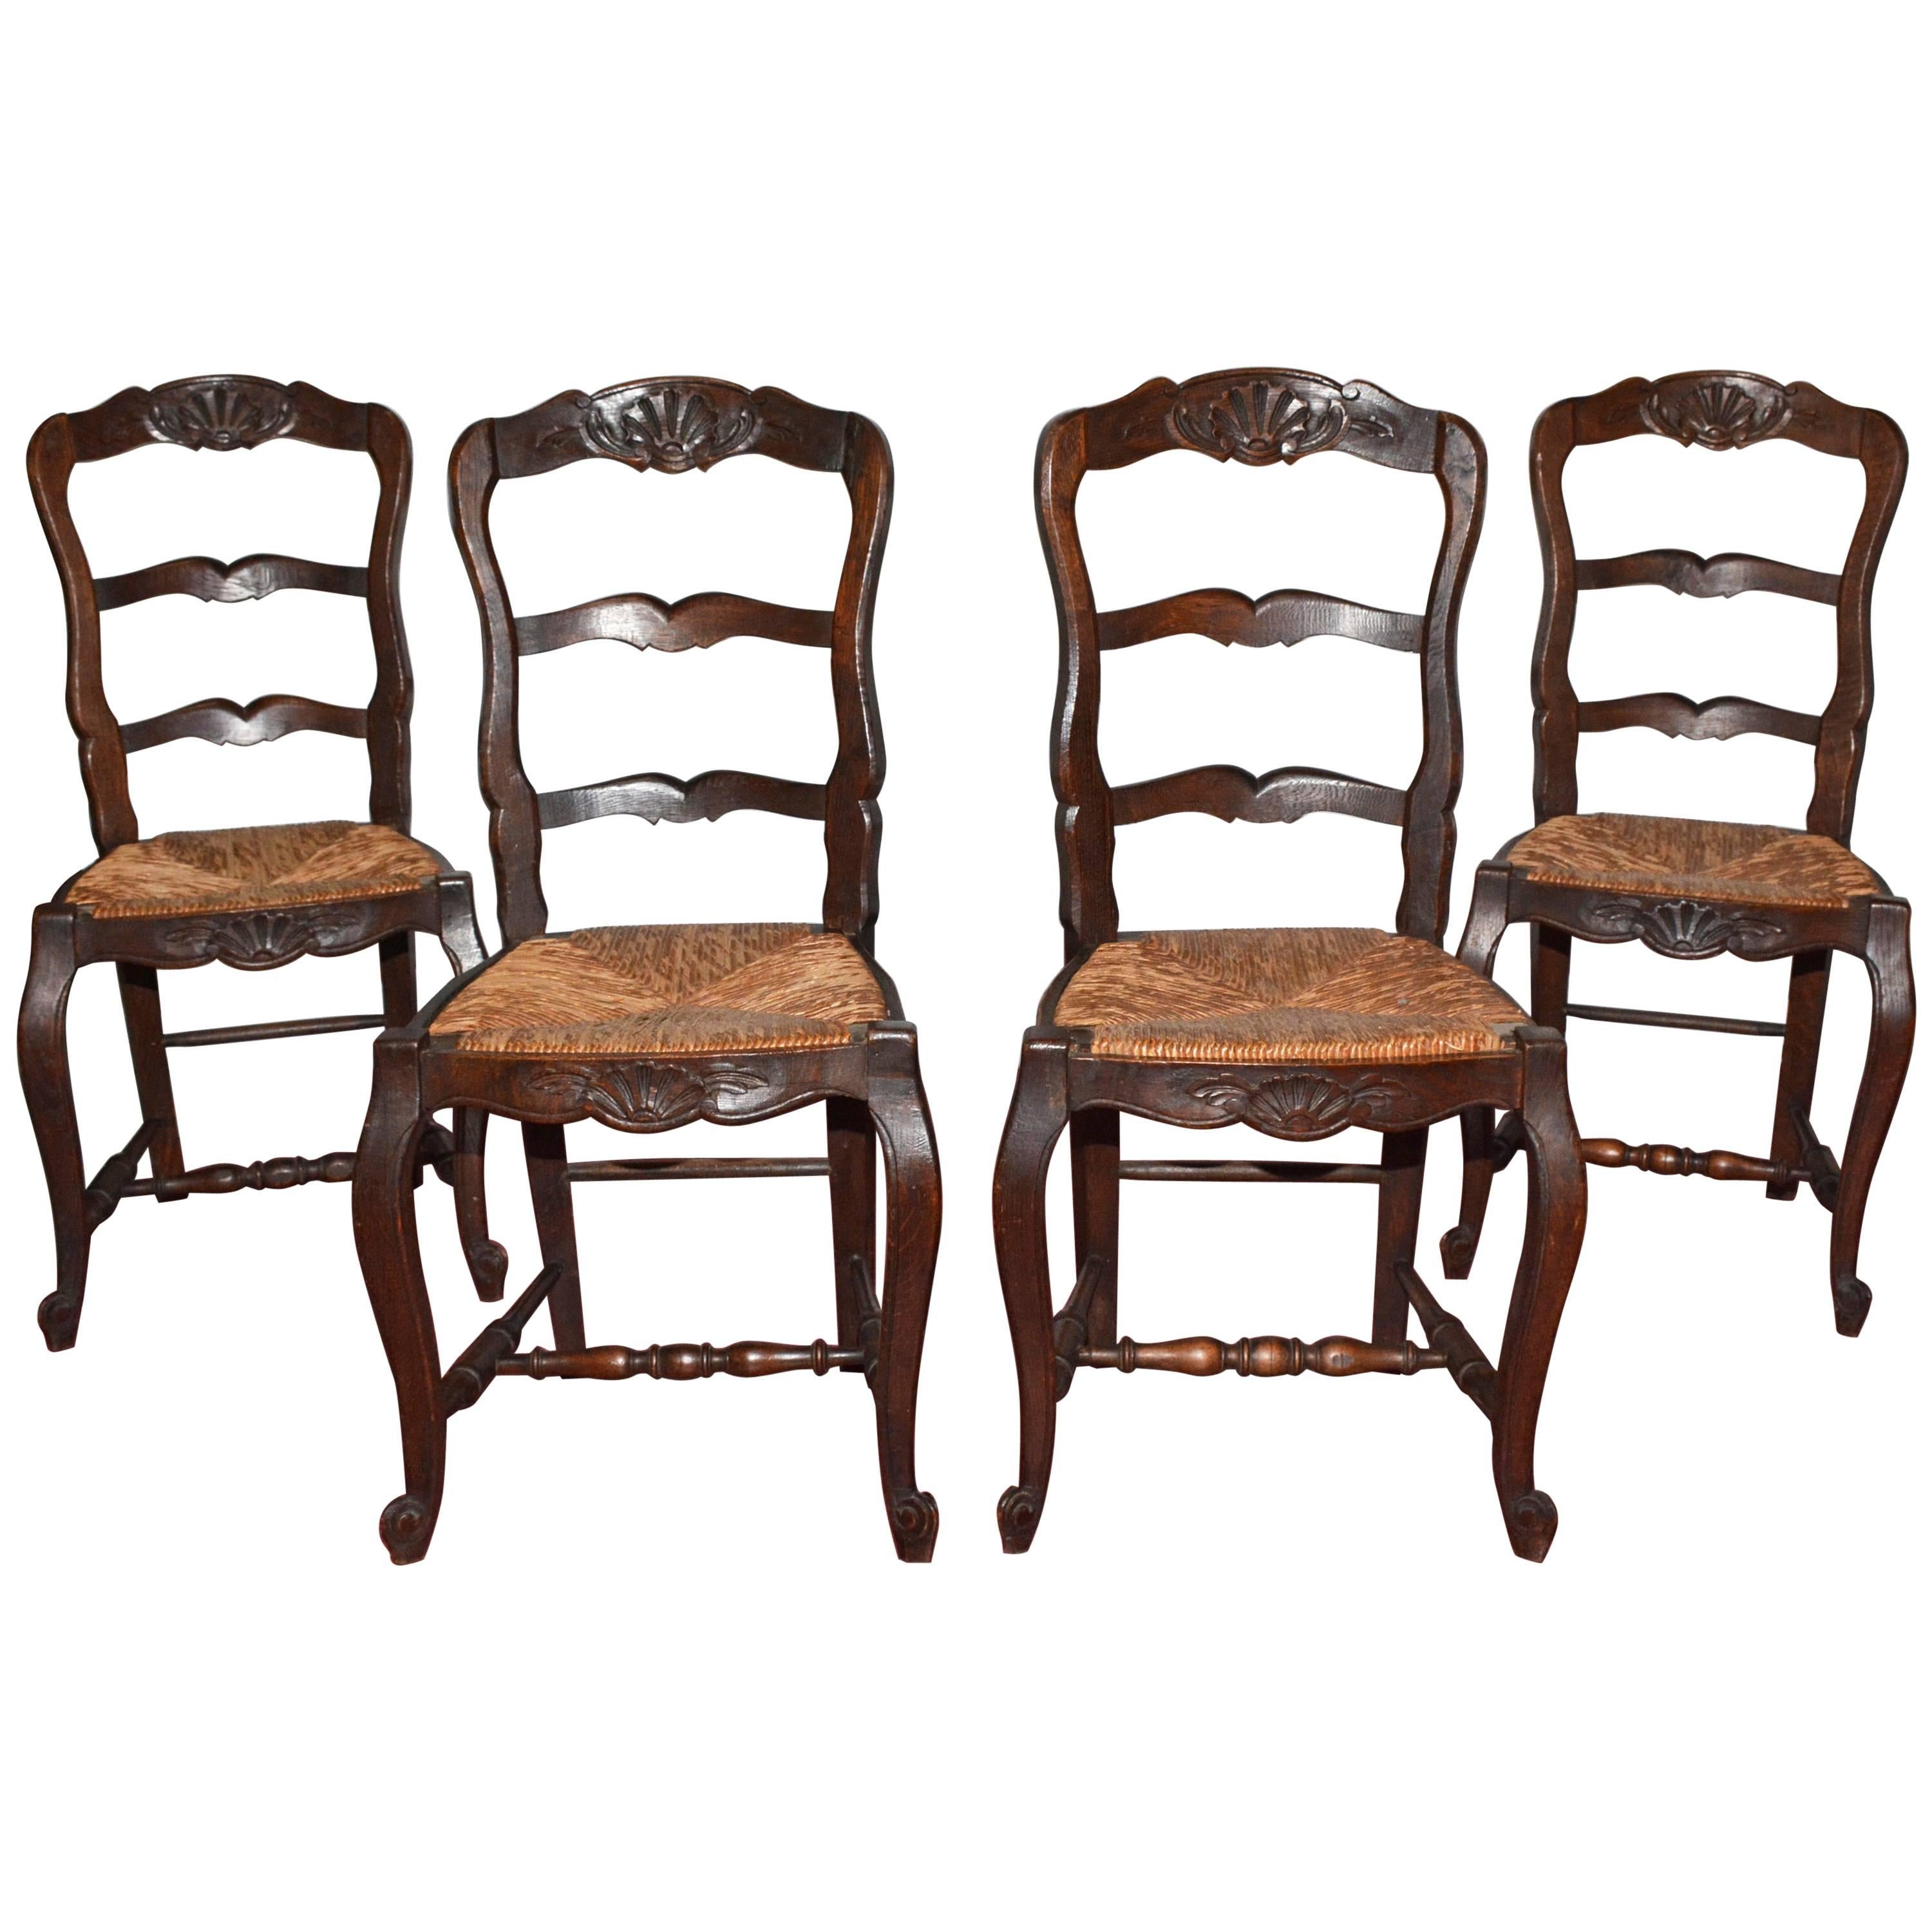 Antique French Provincial Dining Chairs